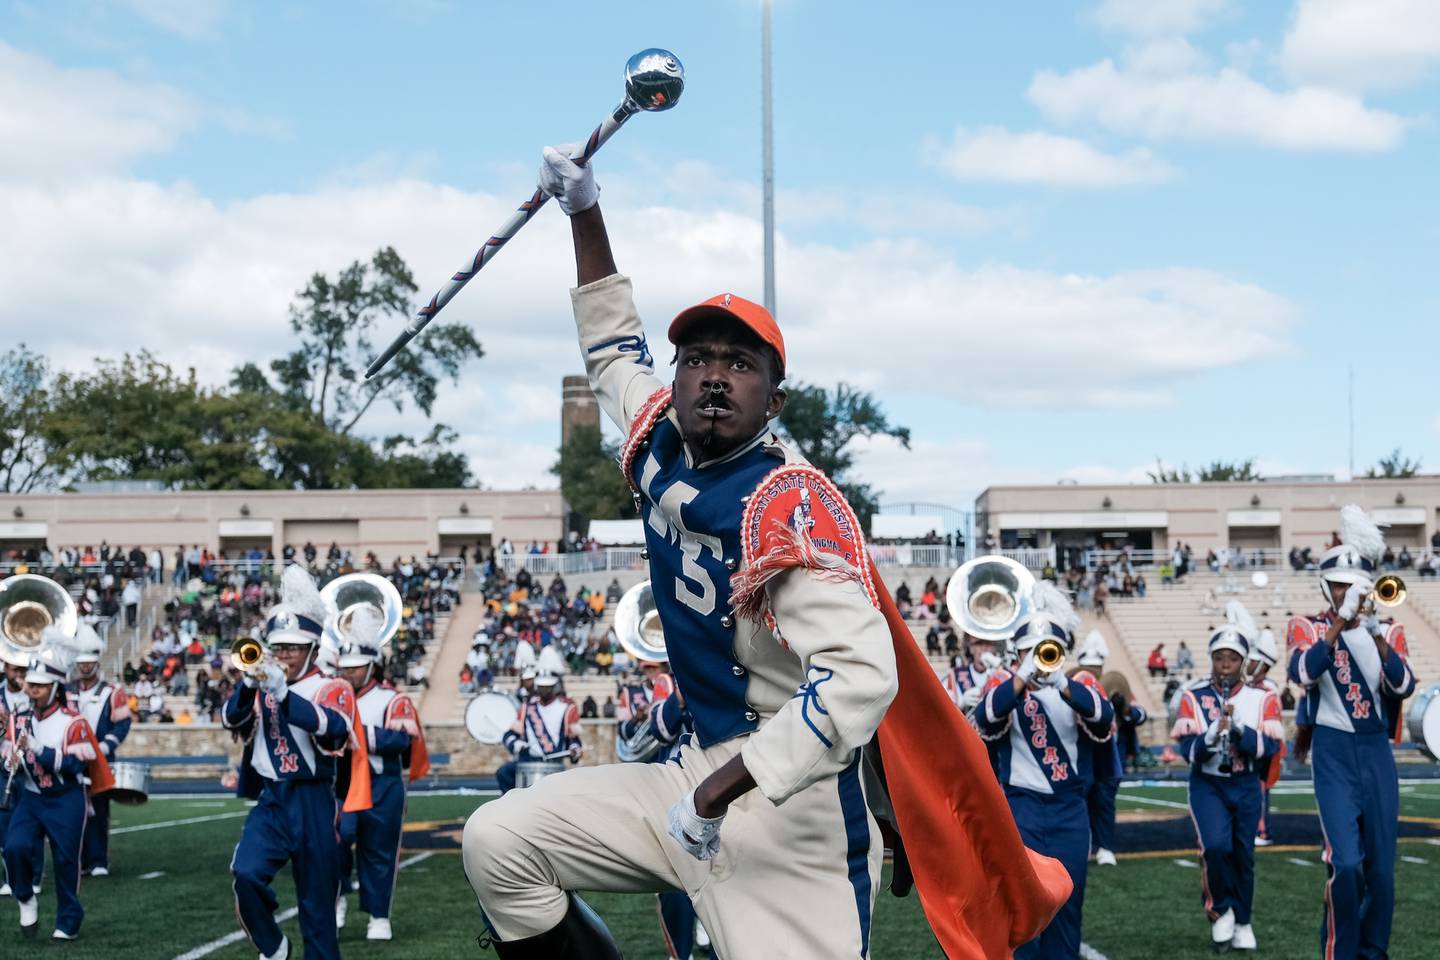 The Morgan Sate University band performs during the halftime show at the homecoming game versus Norfolk State University.